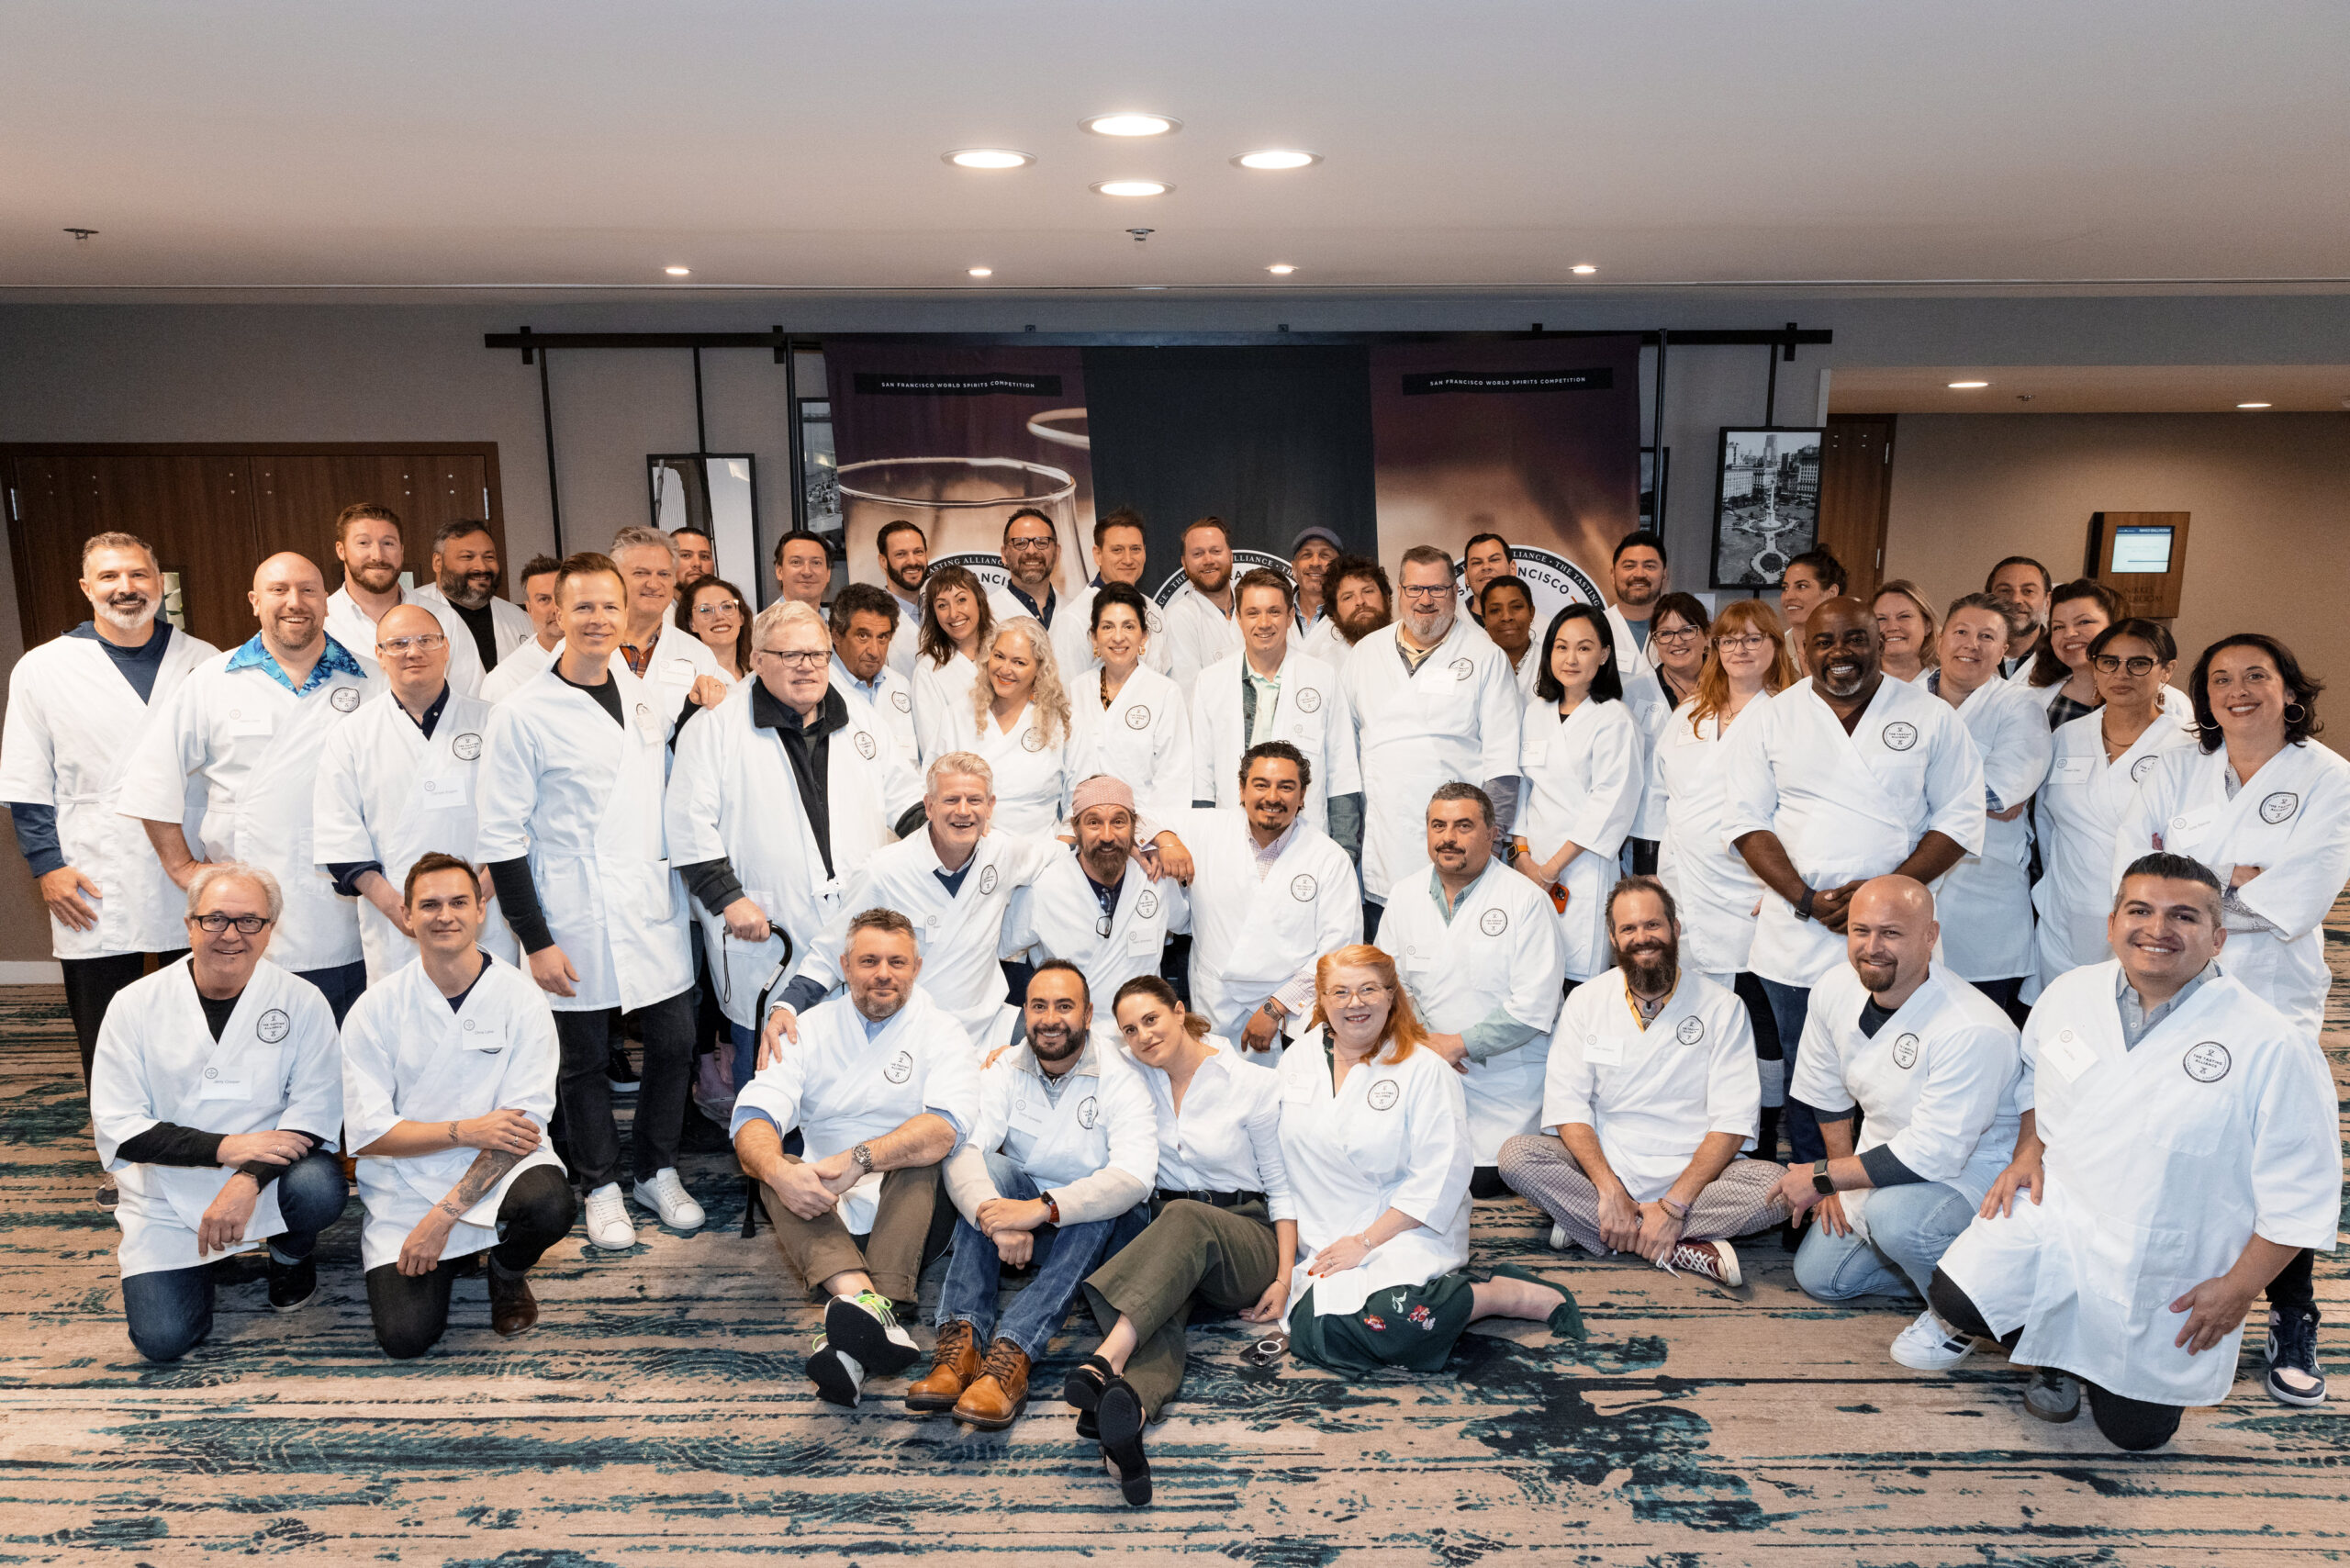 A Group picture of The Tasting Alliance testing the world's best spirits at the 2023 San Francisco World Spirits Competition